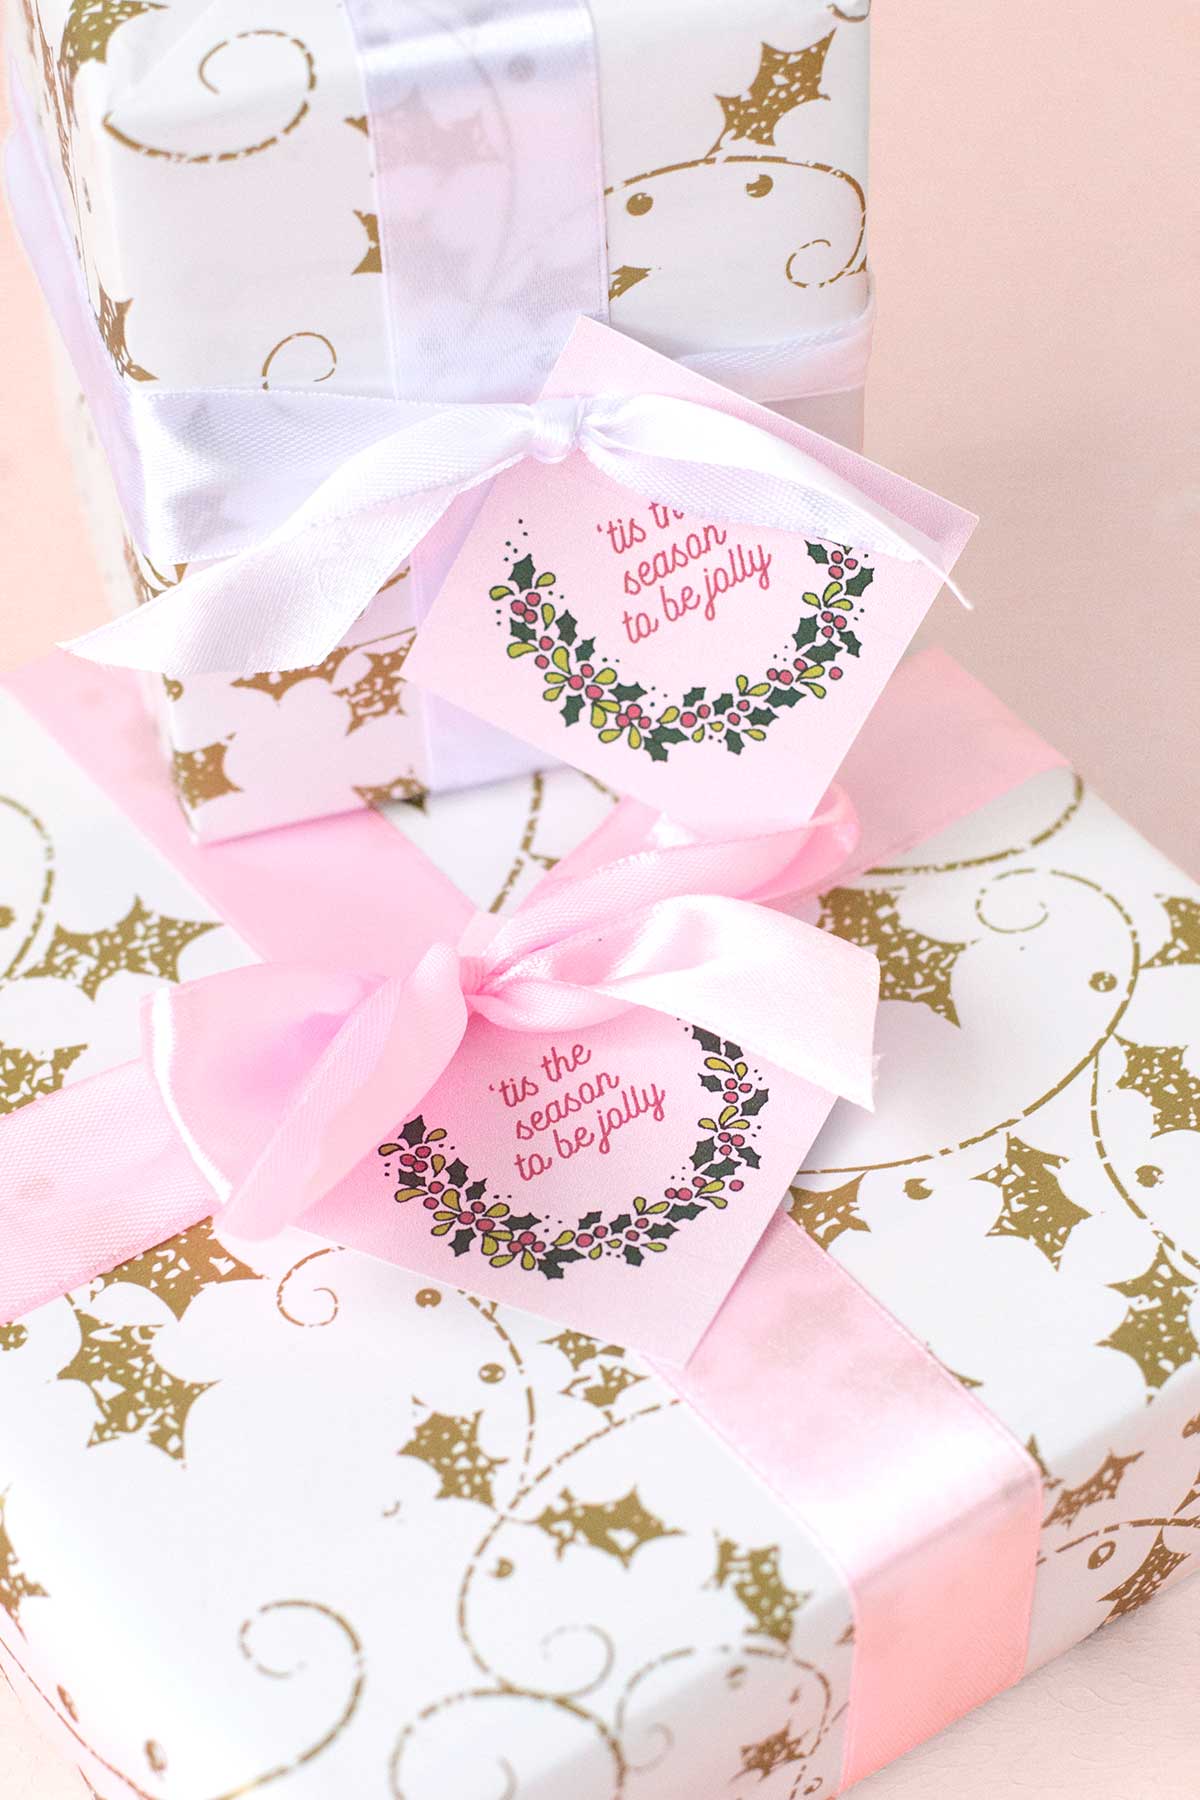 Holly Christmas gift tags for the festive season - with free printable!